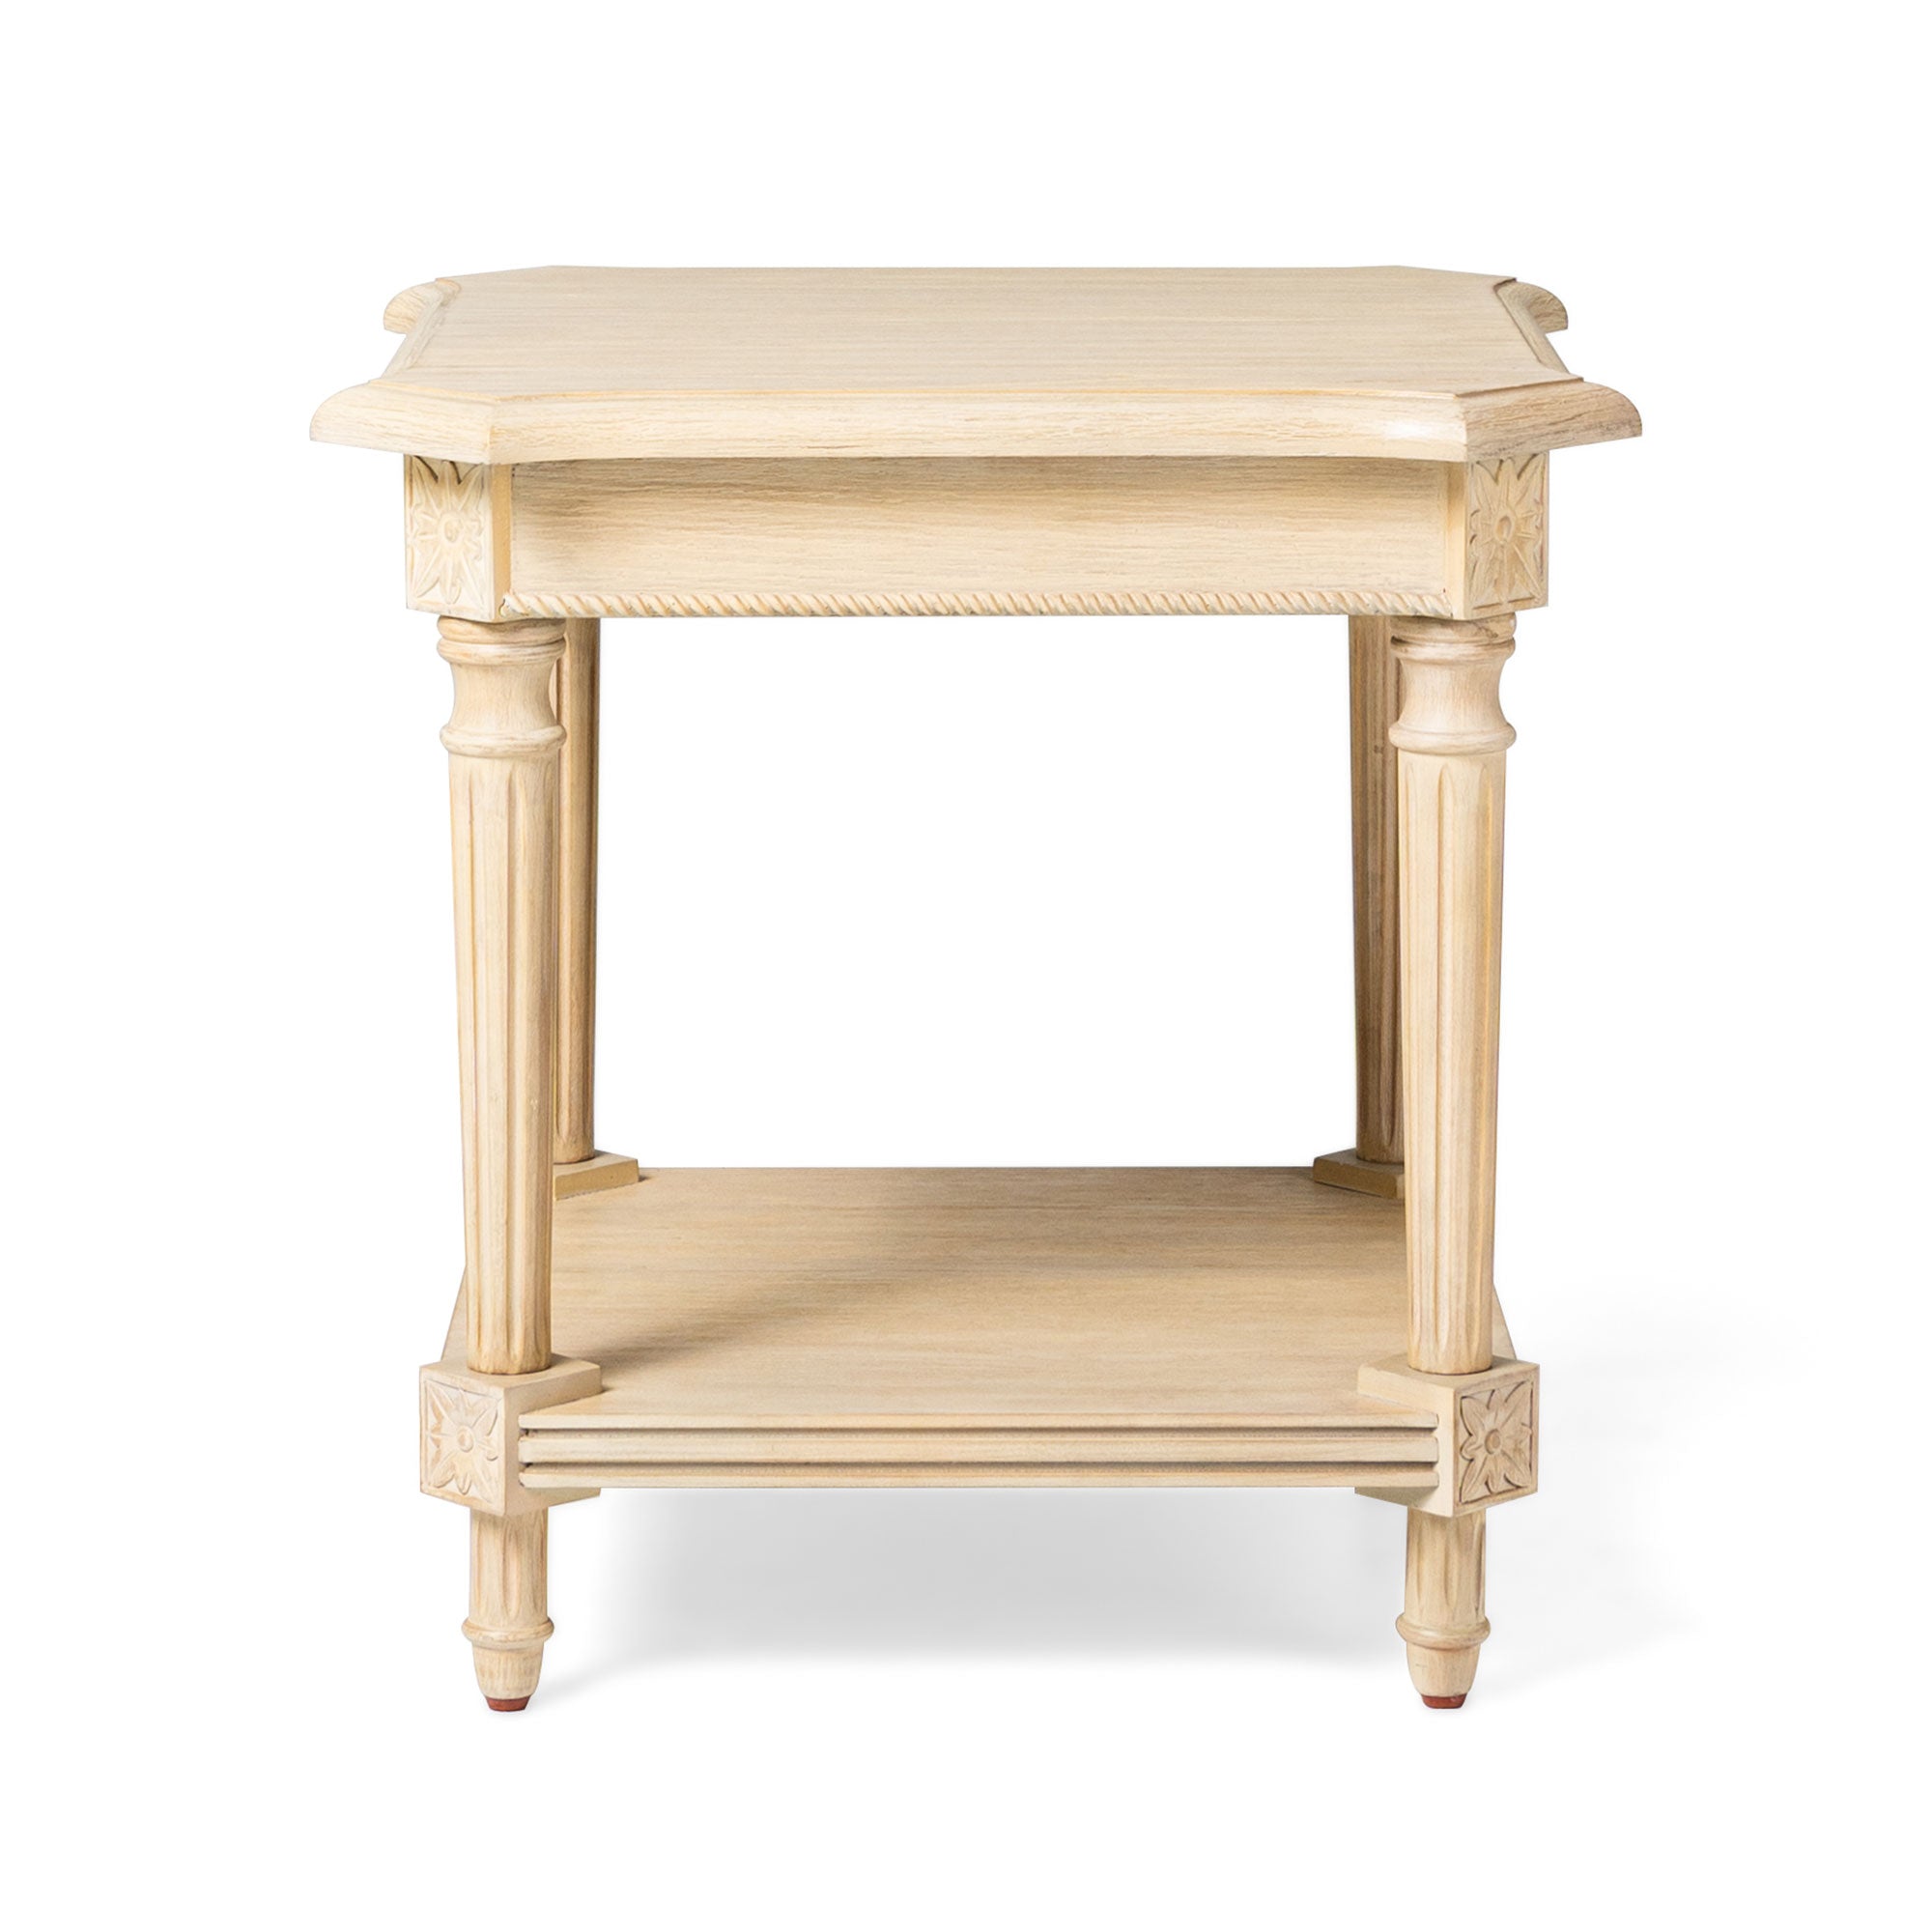 Pullman Traditional Square Wooden Side Table in Antiqued White Finish in Accent Tables by Maven Lane